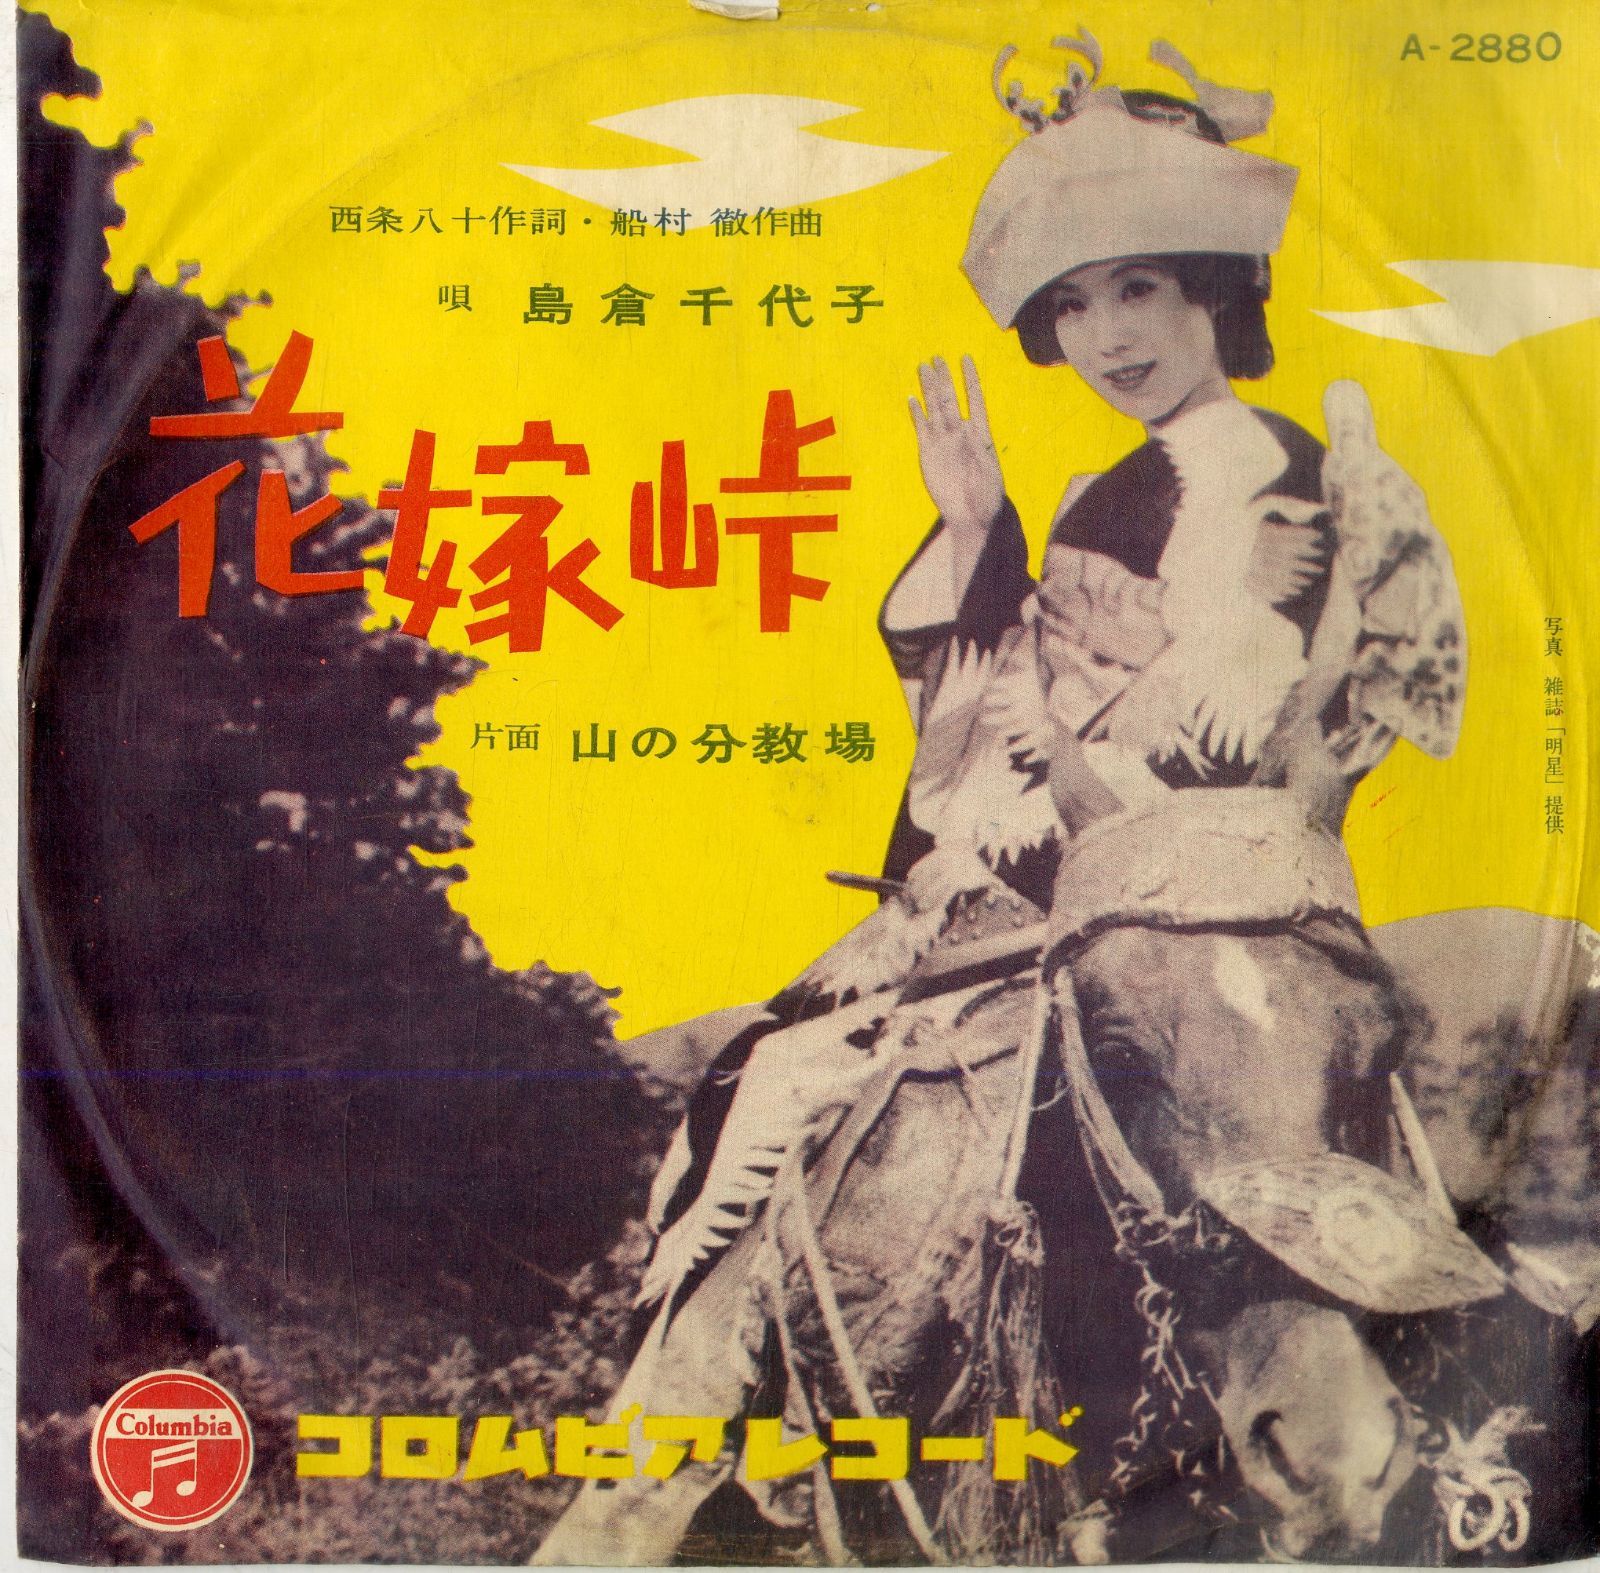 78RPM/SP 島倉千代子 花嫁峠 / 山の分教場 A2880 COLUMBIA /00500